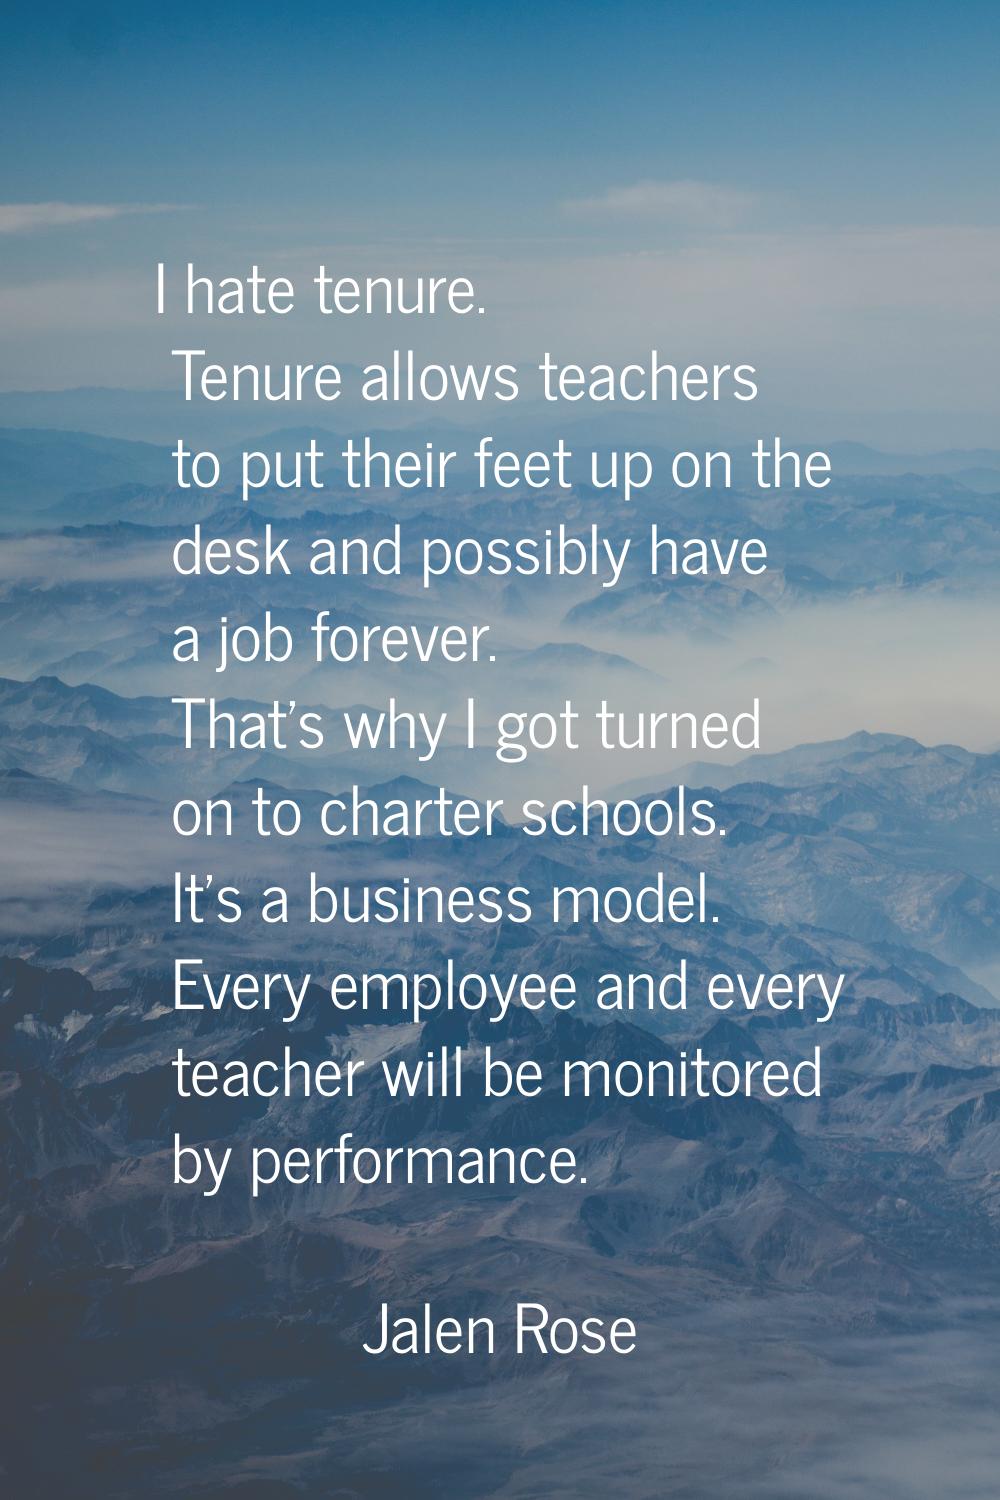 I hate tenure. Tenure allows teachers to put their feet up on the desk and possibly have a job fore